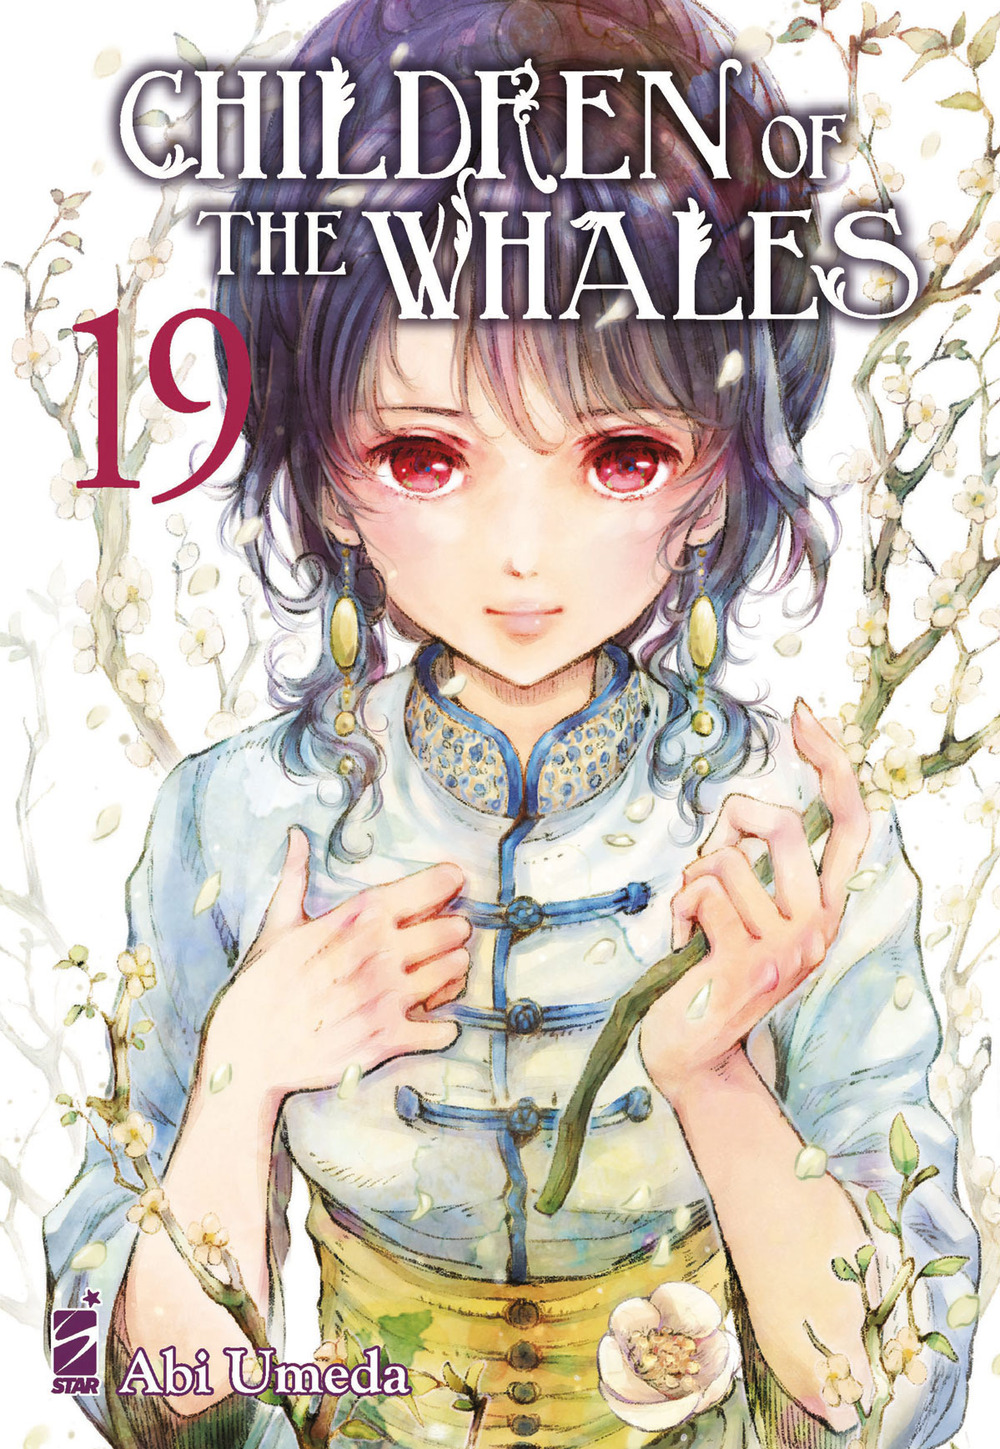 Children of the whales. Vol. 19